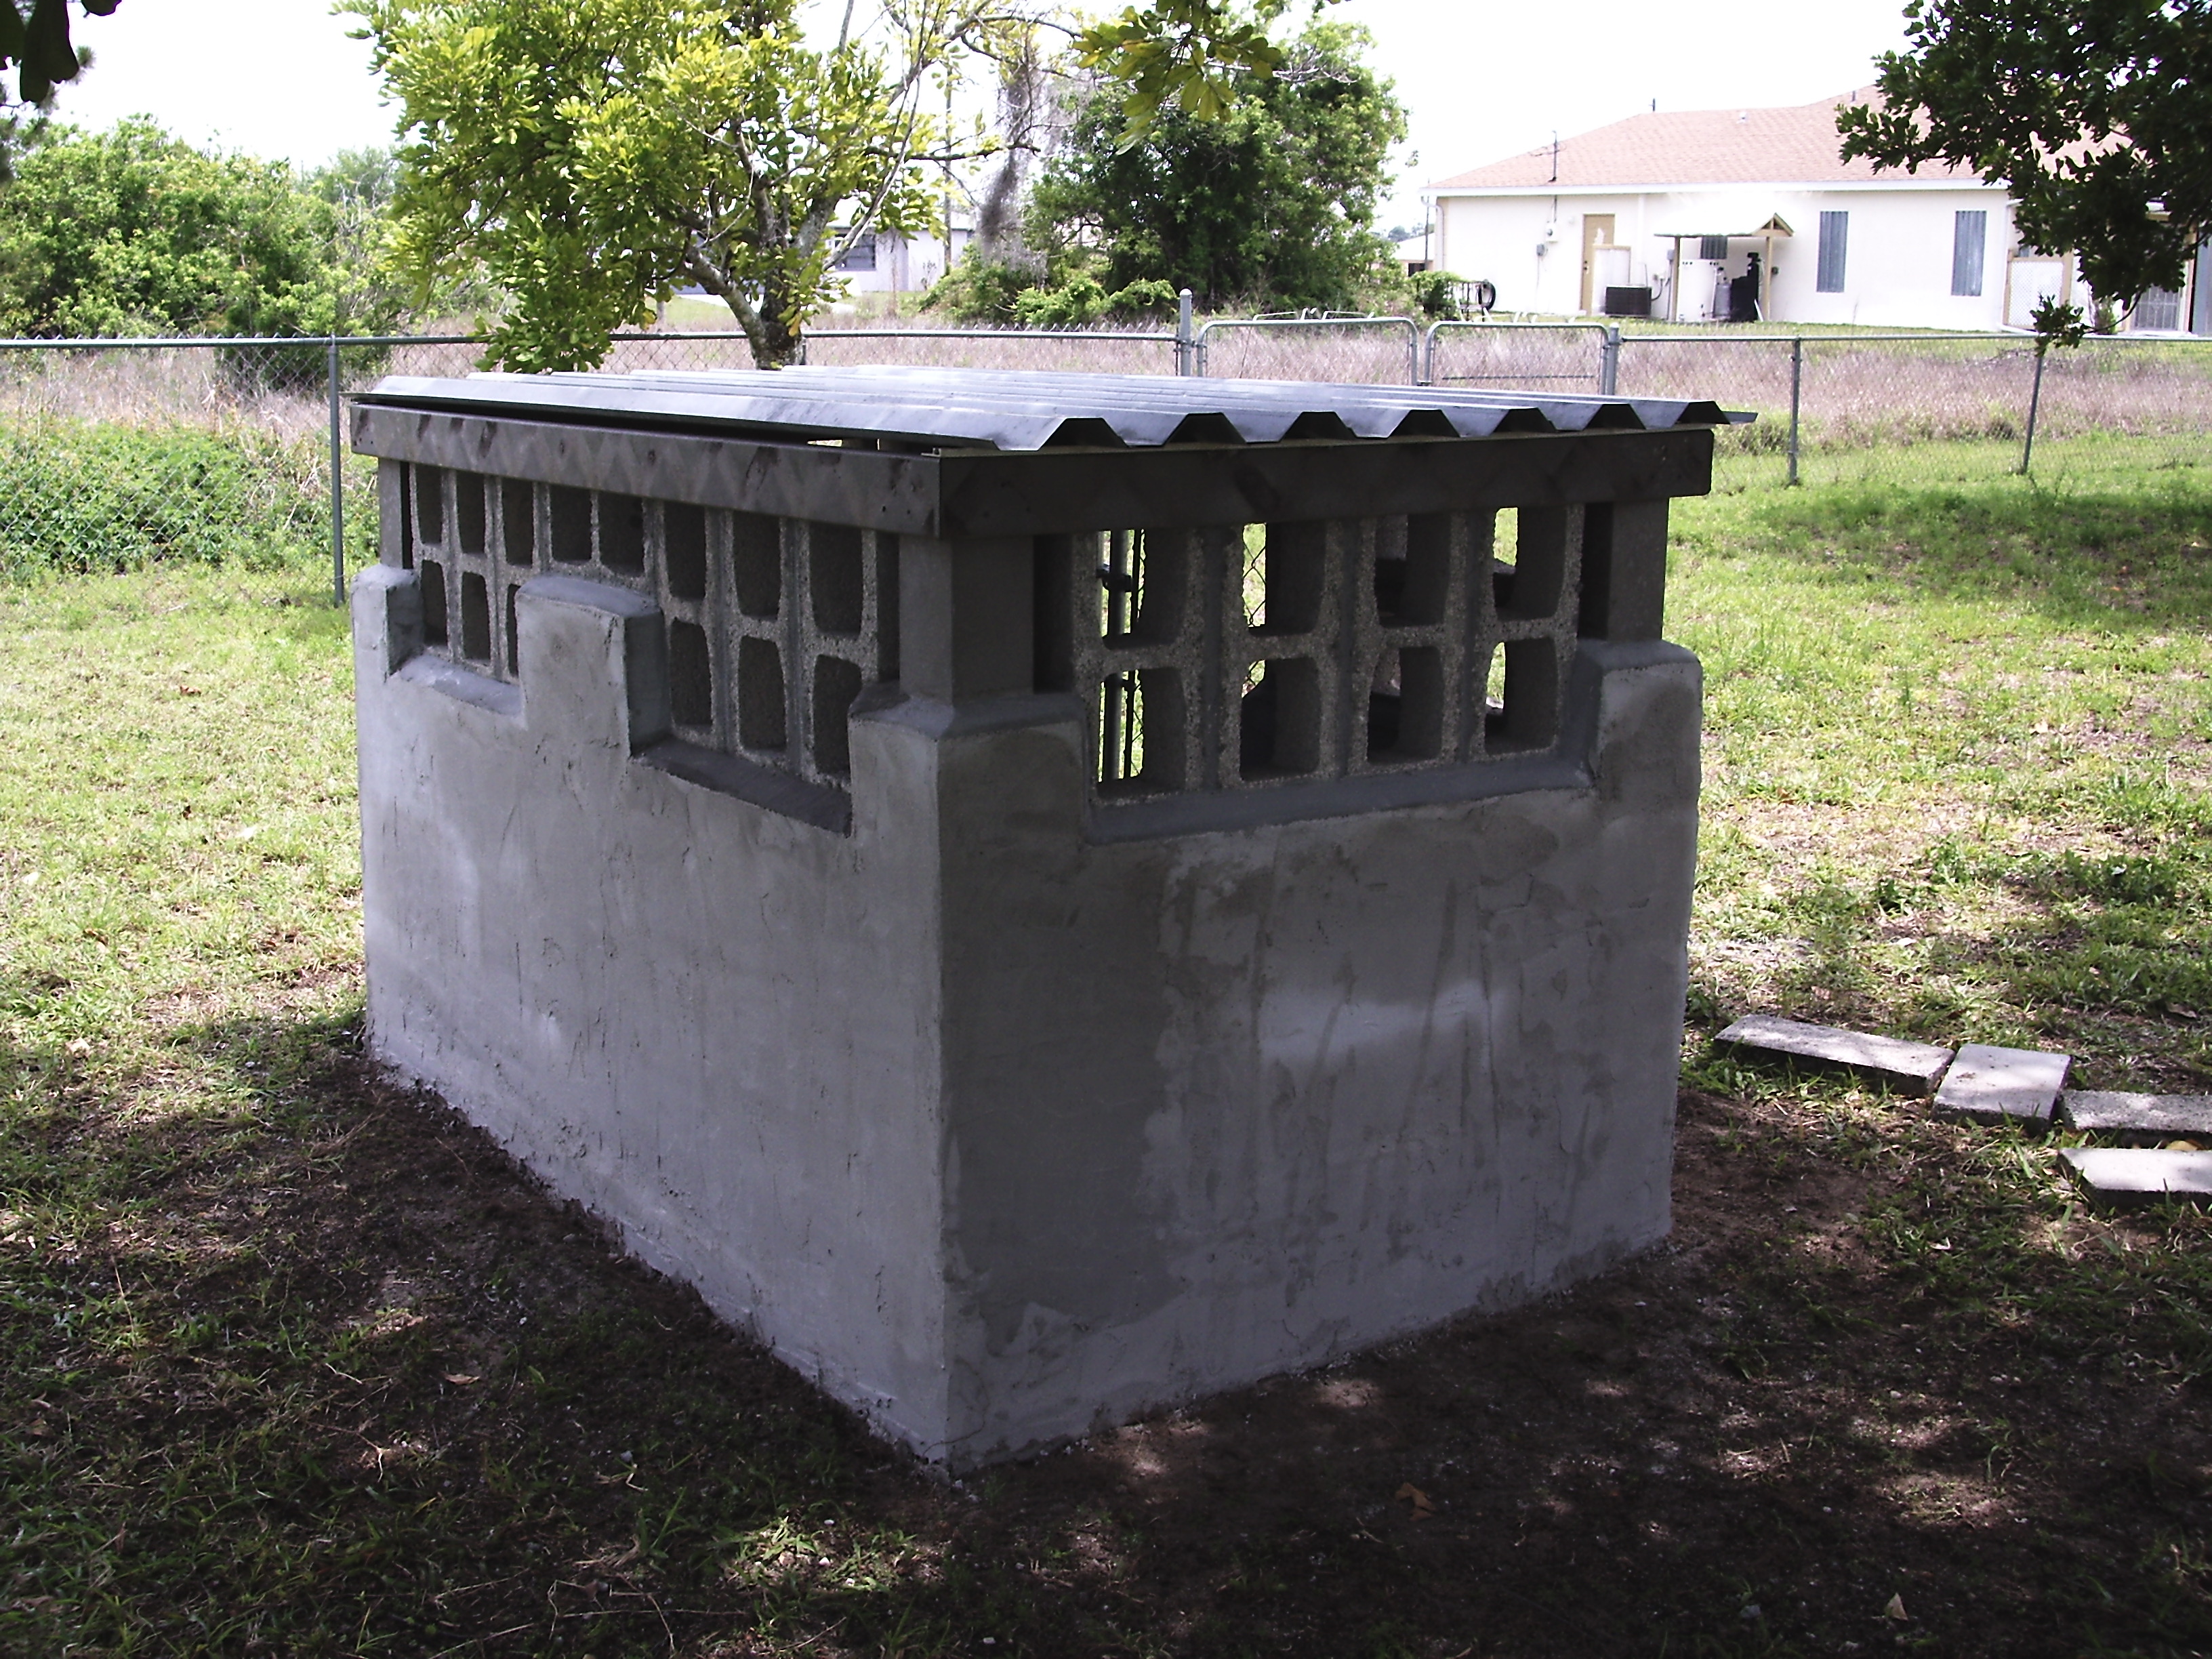 8x16 concrete block walls with locked gate and steel roof for storage 